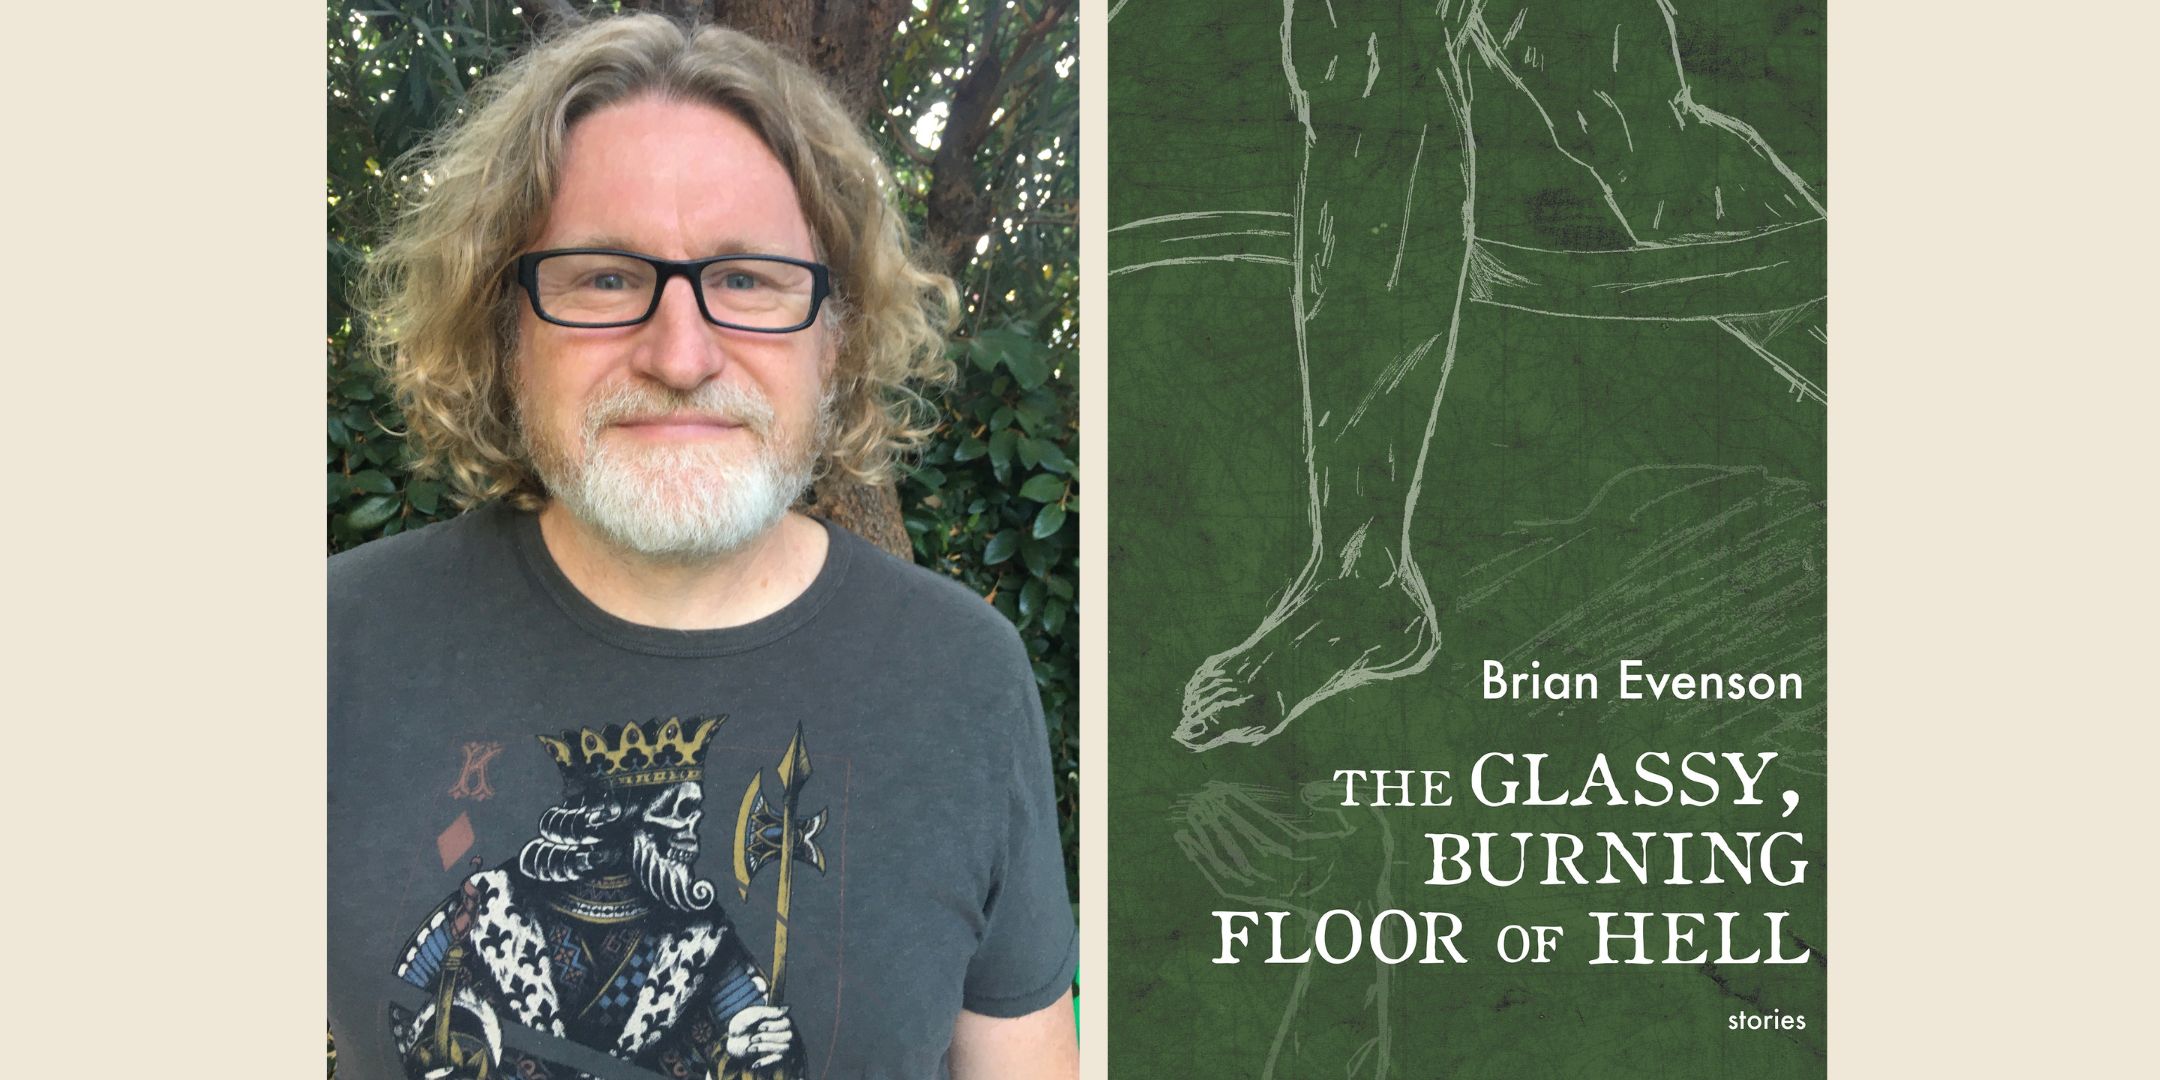 Portrait of Brian Evenson and the book cover for The Glassy, Burning Floor of Hell